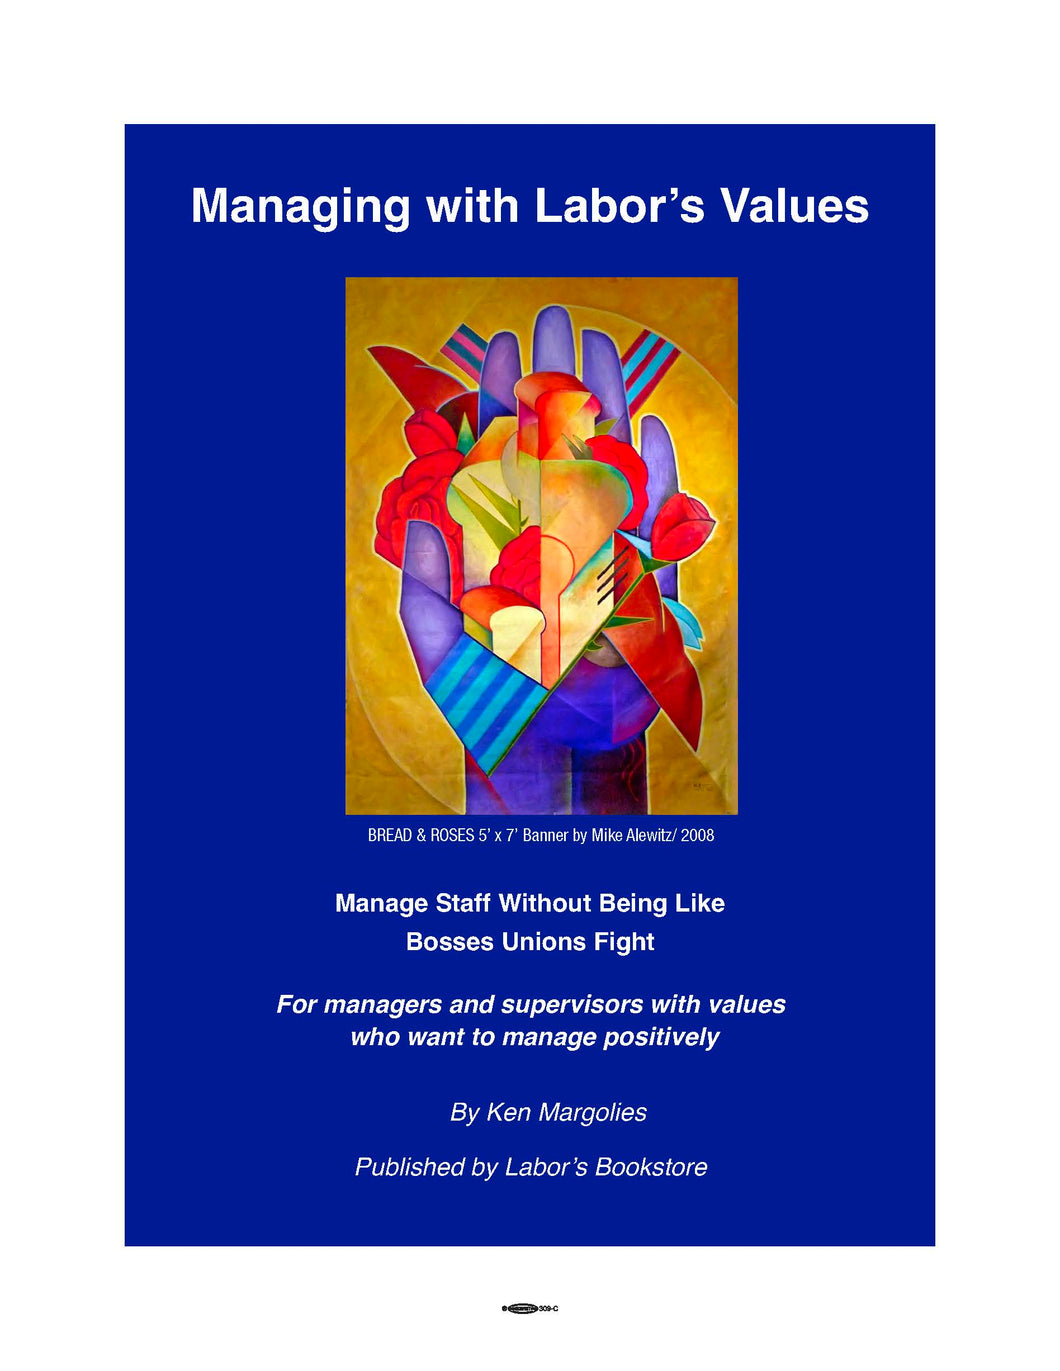 Managing with Labor's Values - 143 page book